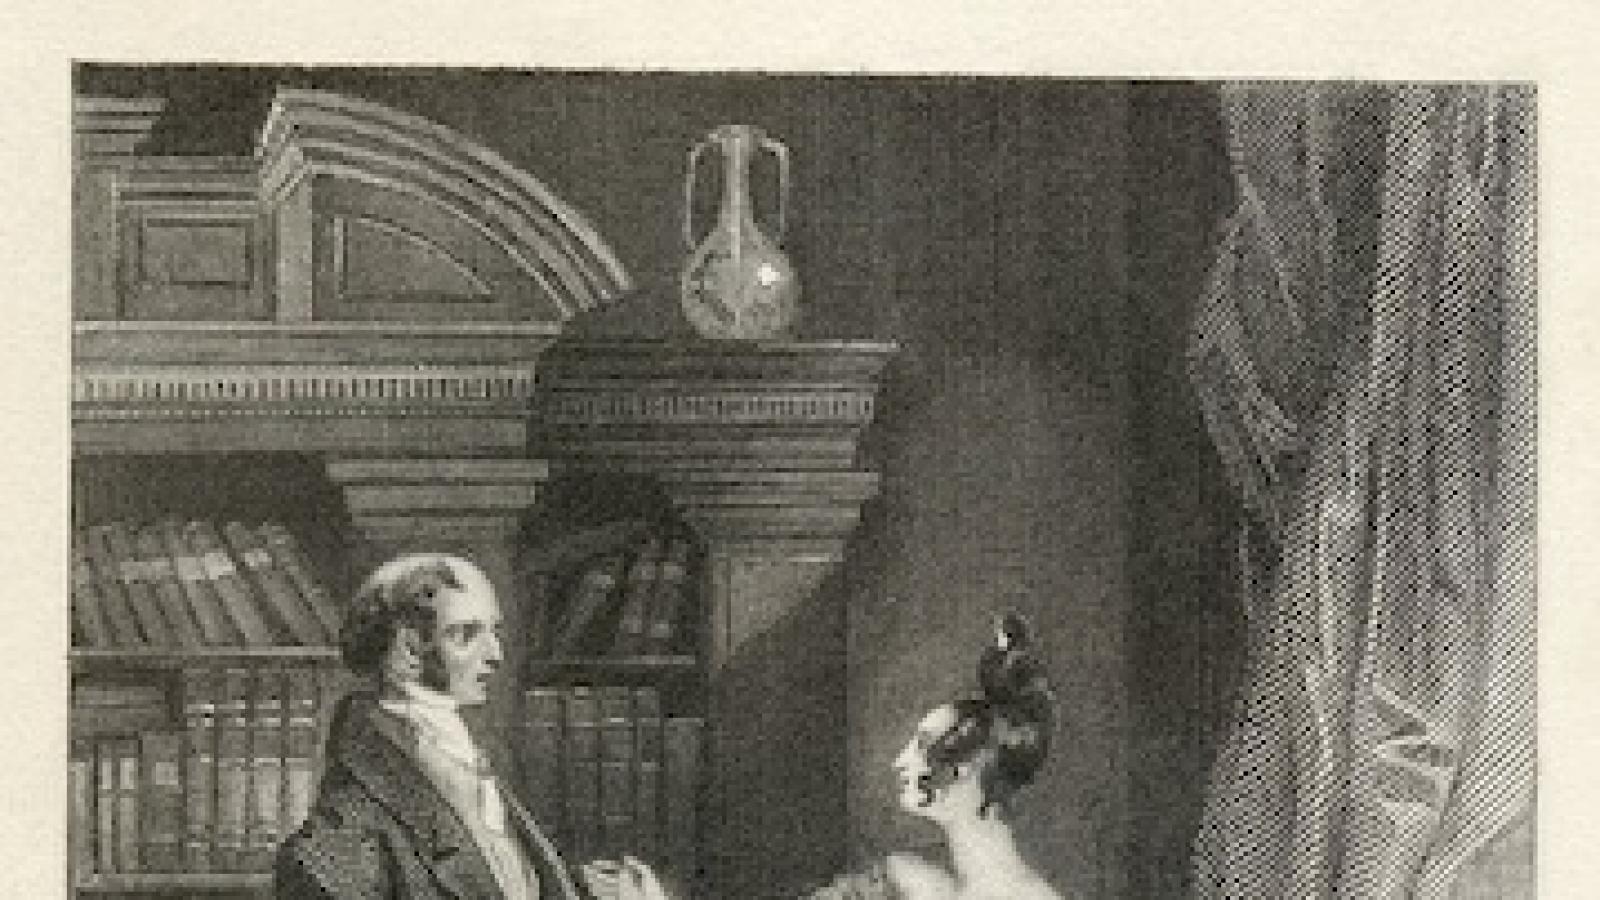 an engraving of a scene from Pride and Prejudice with Lizzie Bennett and Mr. Darcy